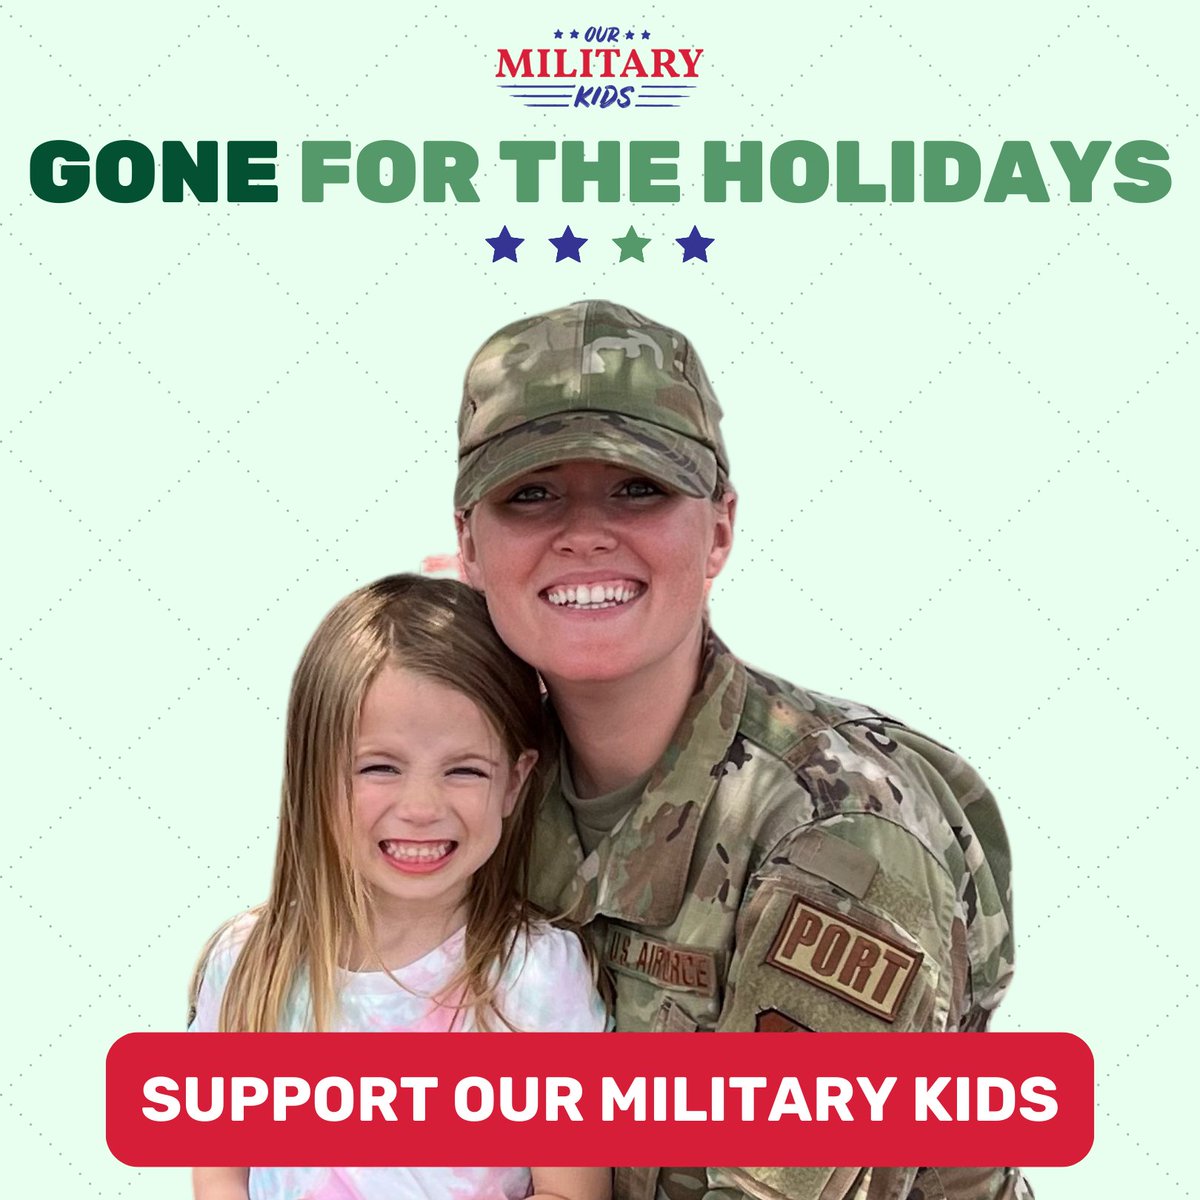 Please help us recognize our Nation’s service members by supporting what is most important to them — their children. ❤️ give.ourmilitarykids.org/gonefortheholi… With OMK-funded activities like camp, #militarykids stay active & connected while their parents serve our country! #GoneForTheHolidays